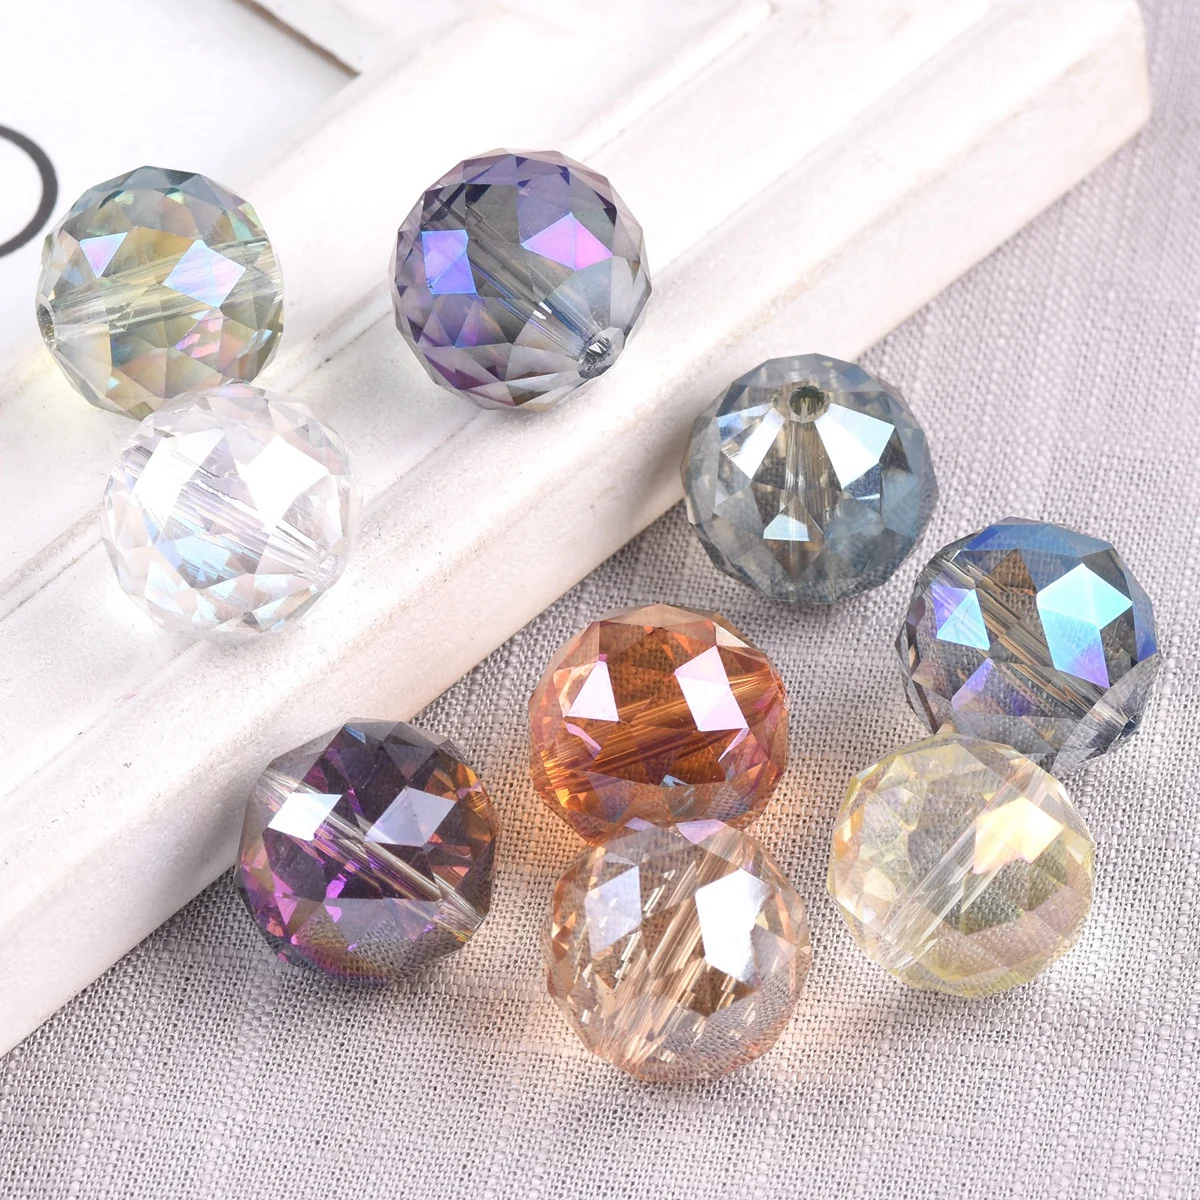 Clear Disco Cut Faceted Round Chinese Crystal Glass Beads 20mm, 18 Beads/strand  Large Crystal Glass Beads for Jewelry Making, Bulk Beads 